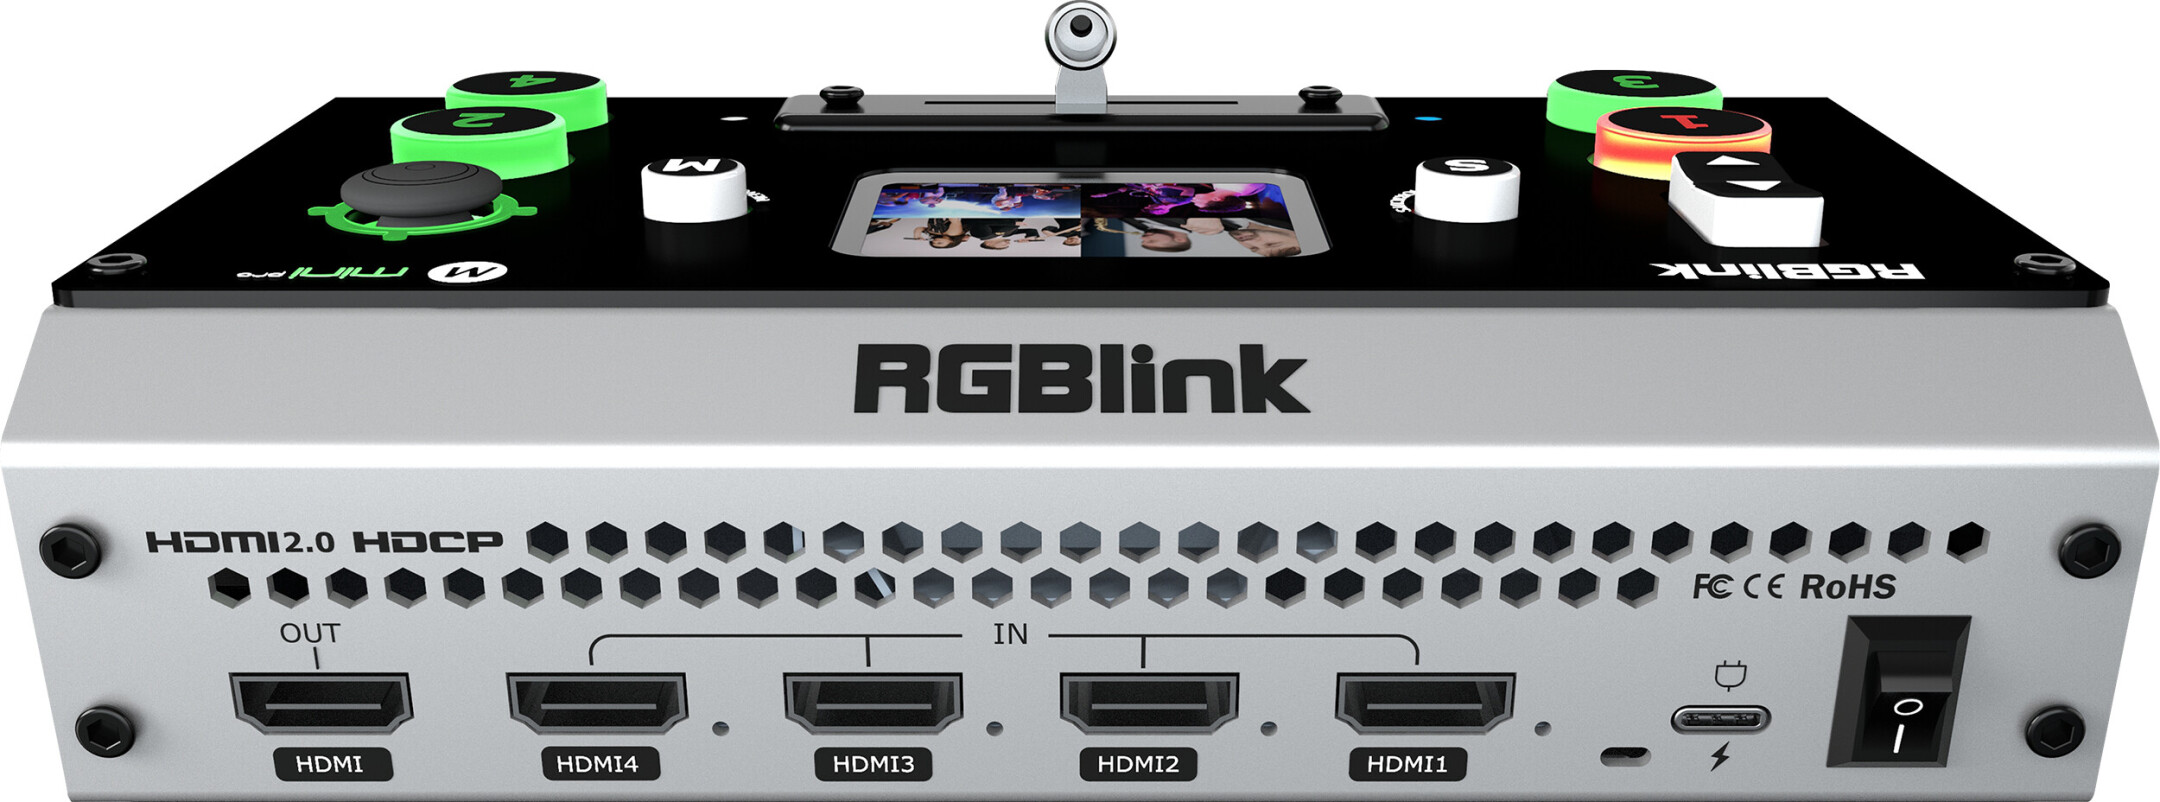 RGBlink-MINI-Pro-Live-Streaming-Video-Mischer